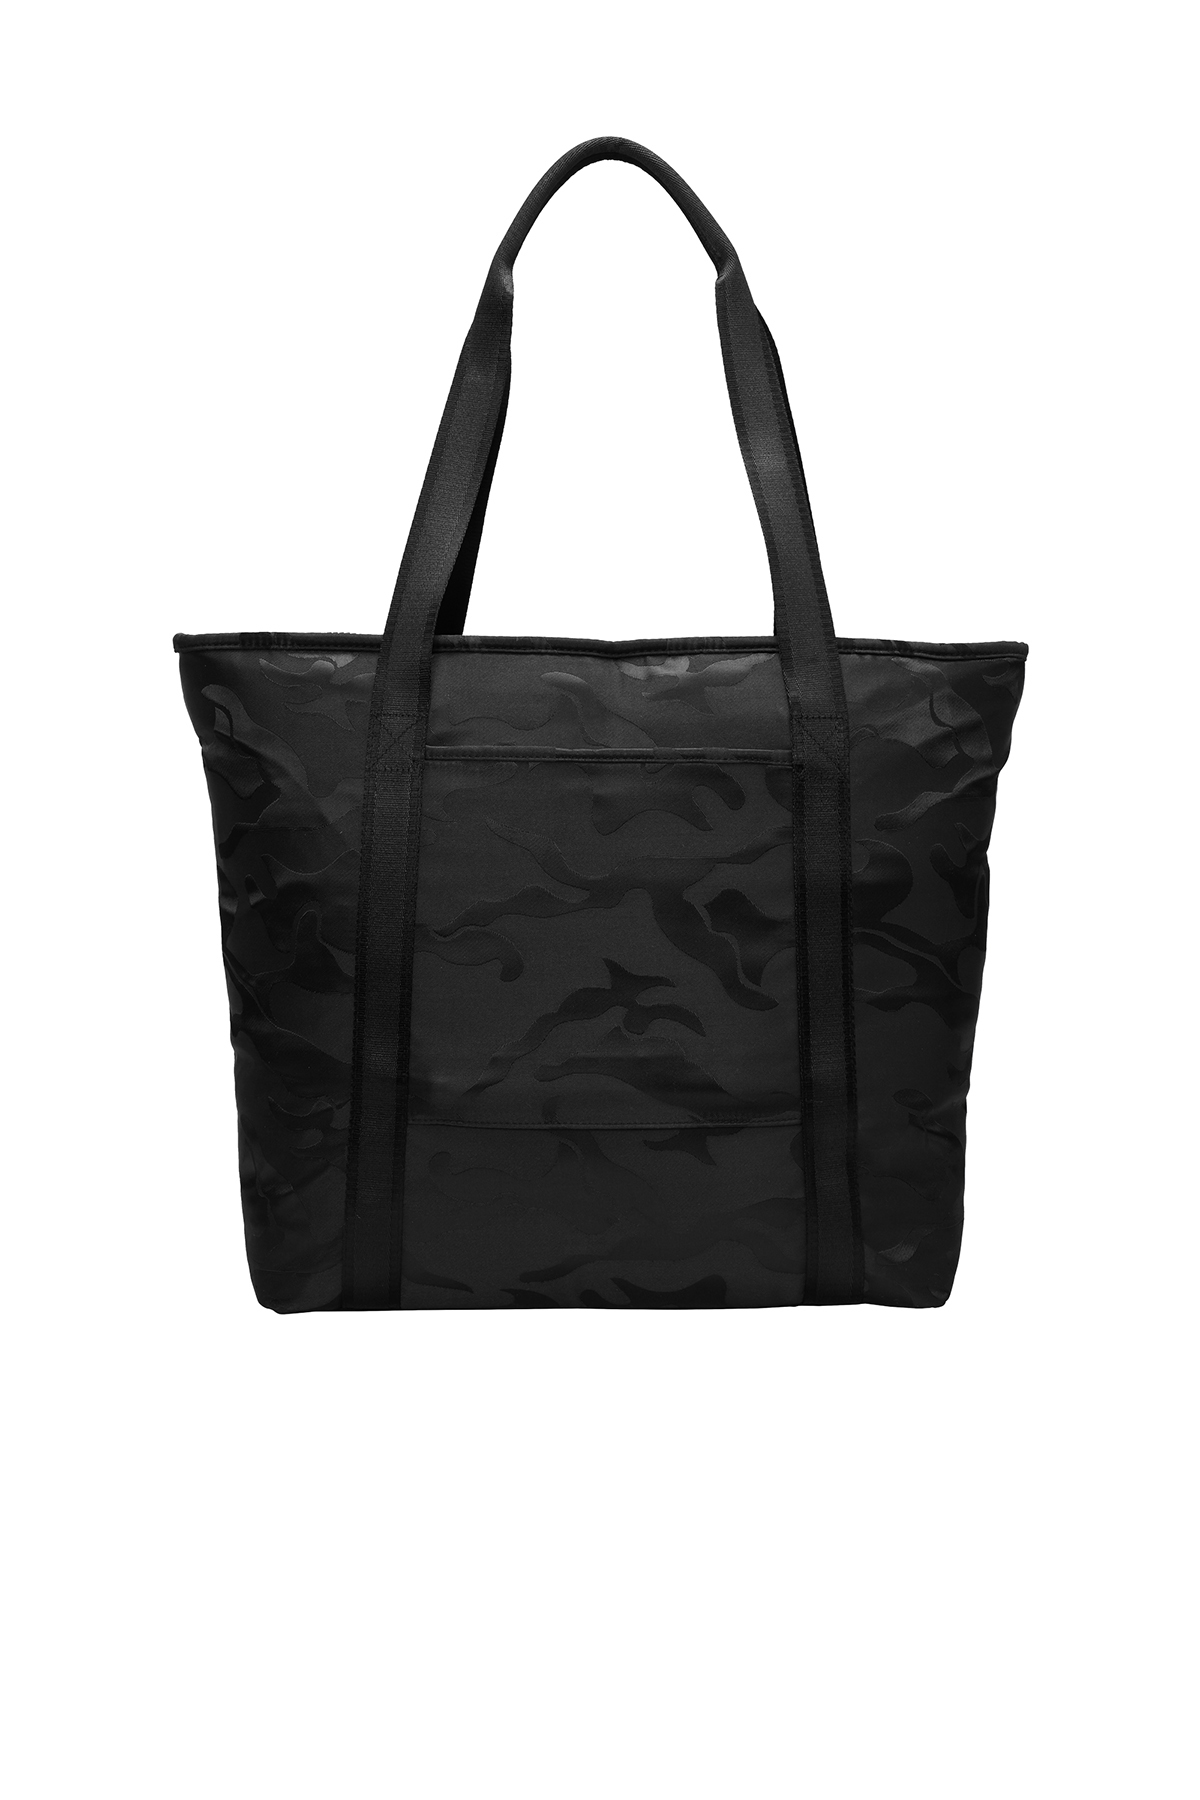 OGIO Downtown Tote | Product | Company Casuals